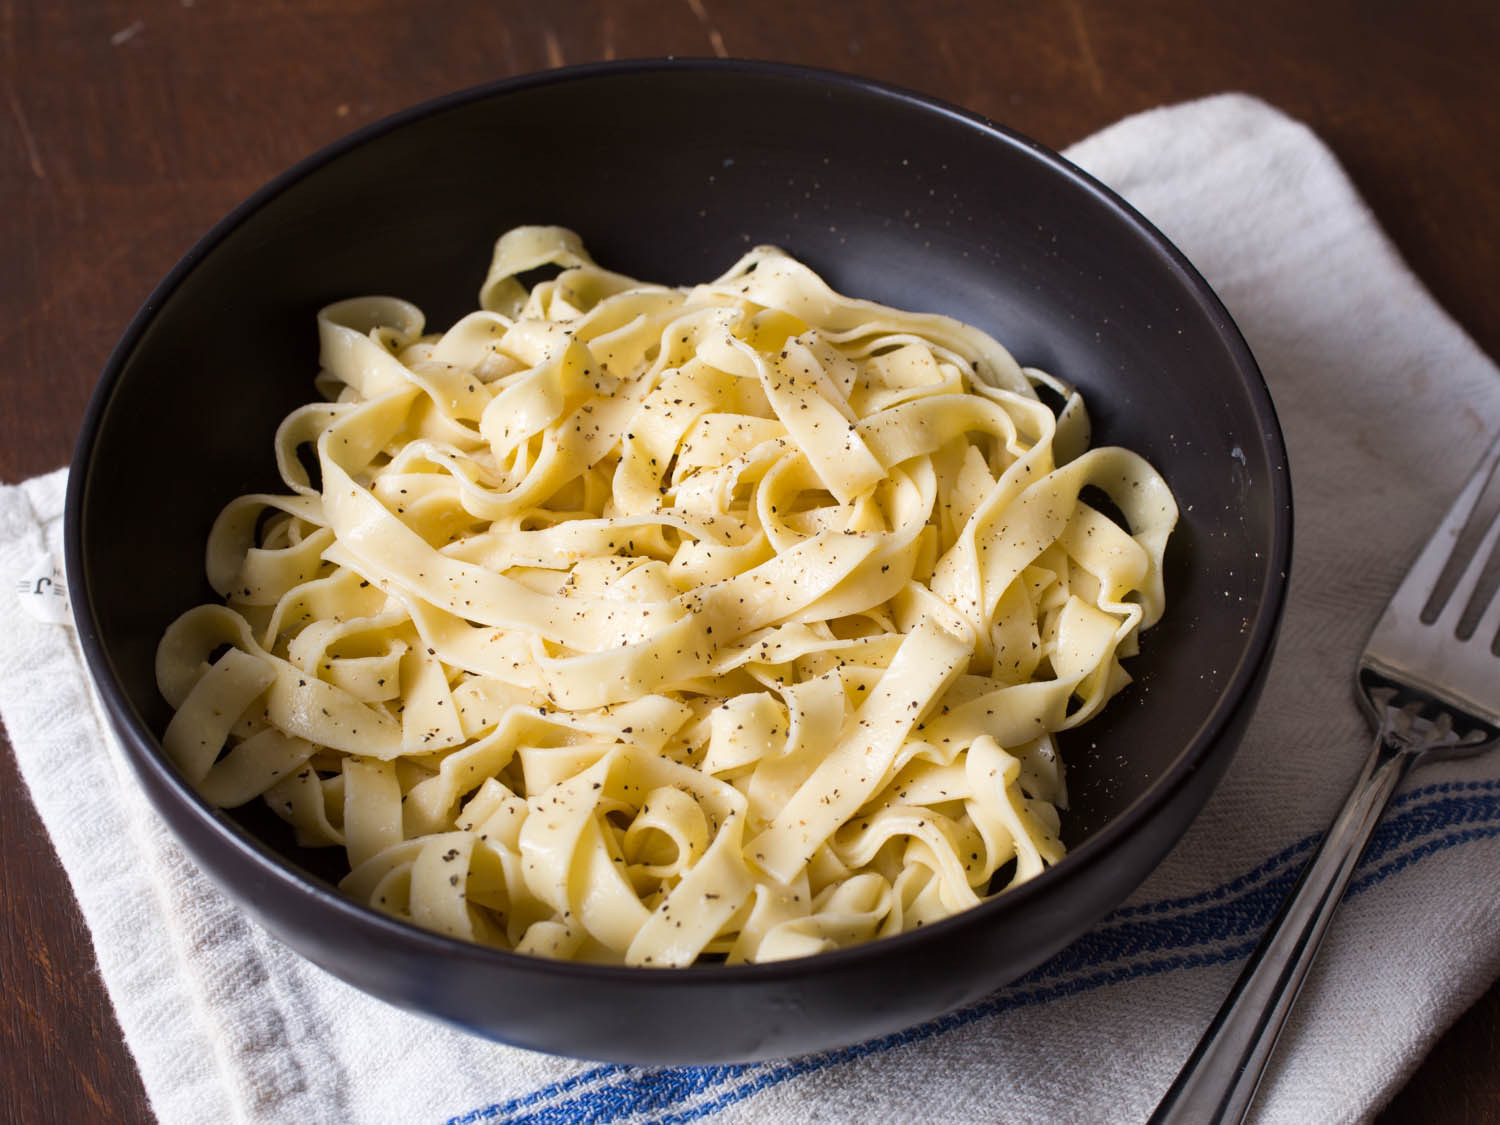 Recipes For Homemade Pasta
 The Science of the Best Fresh Pasta